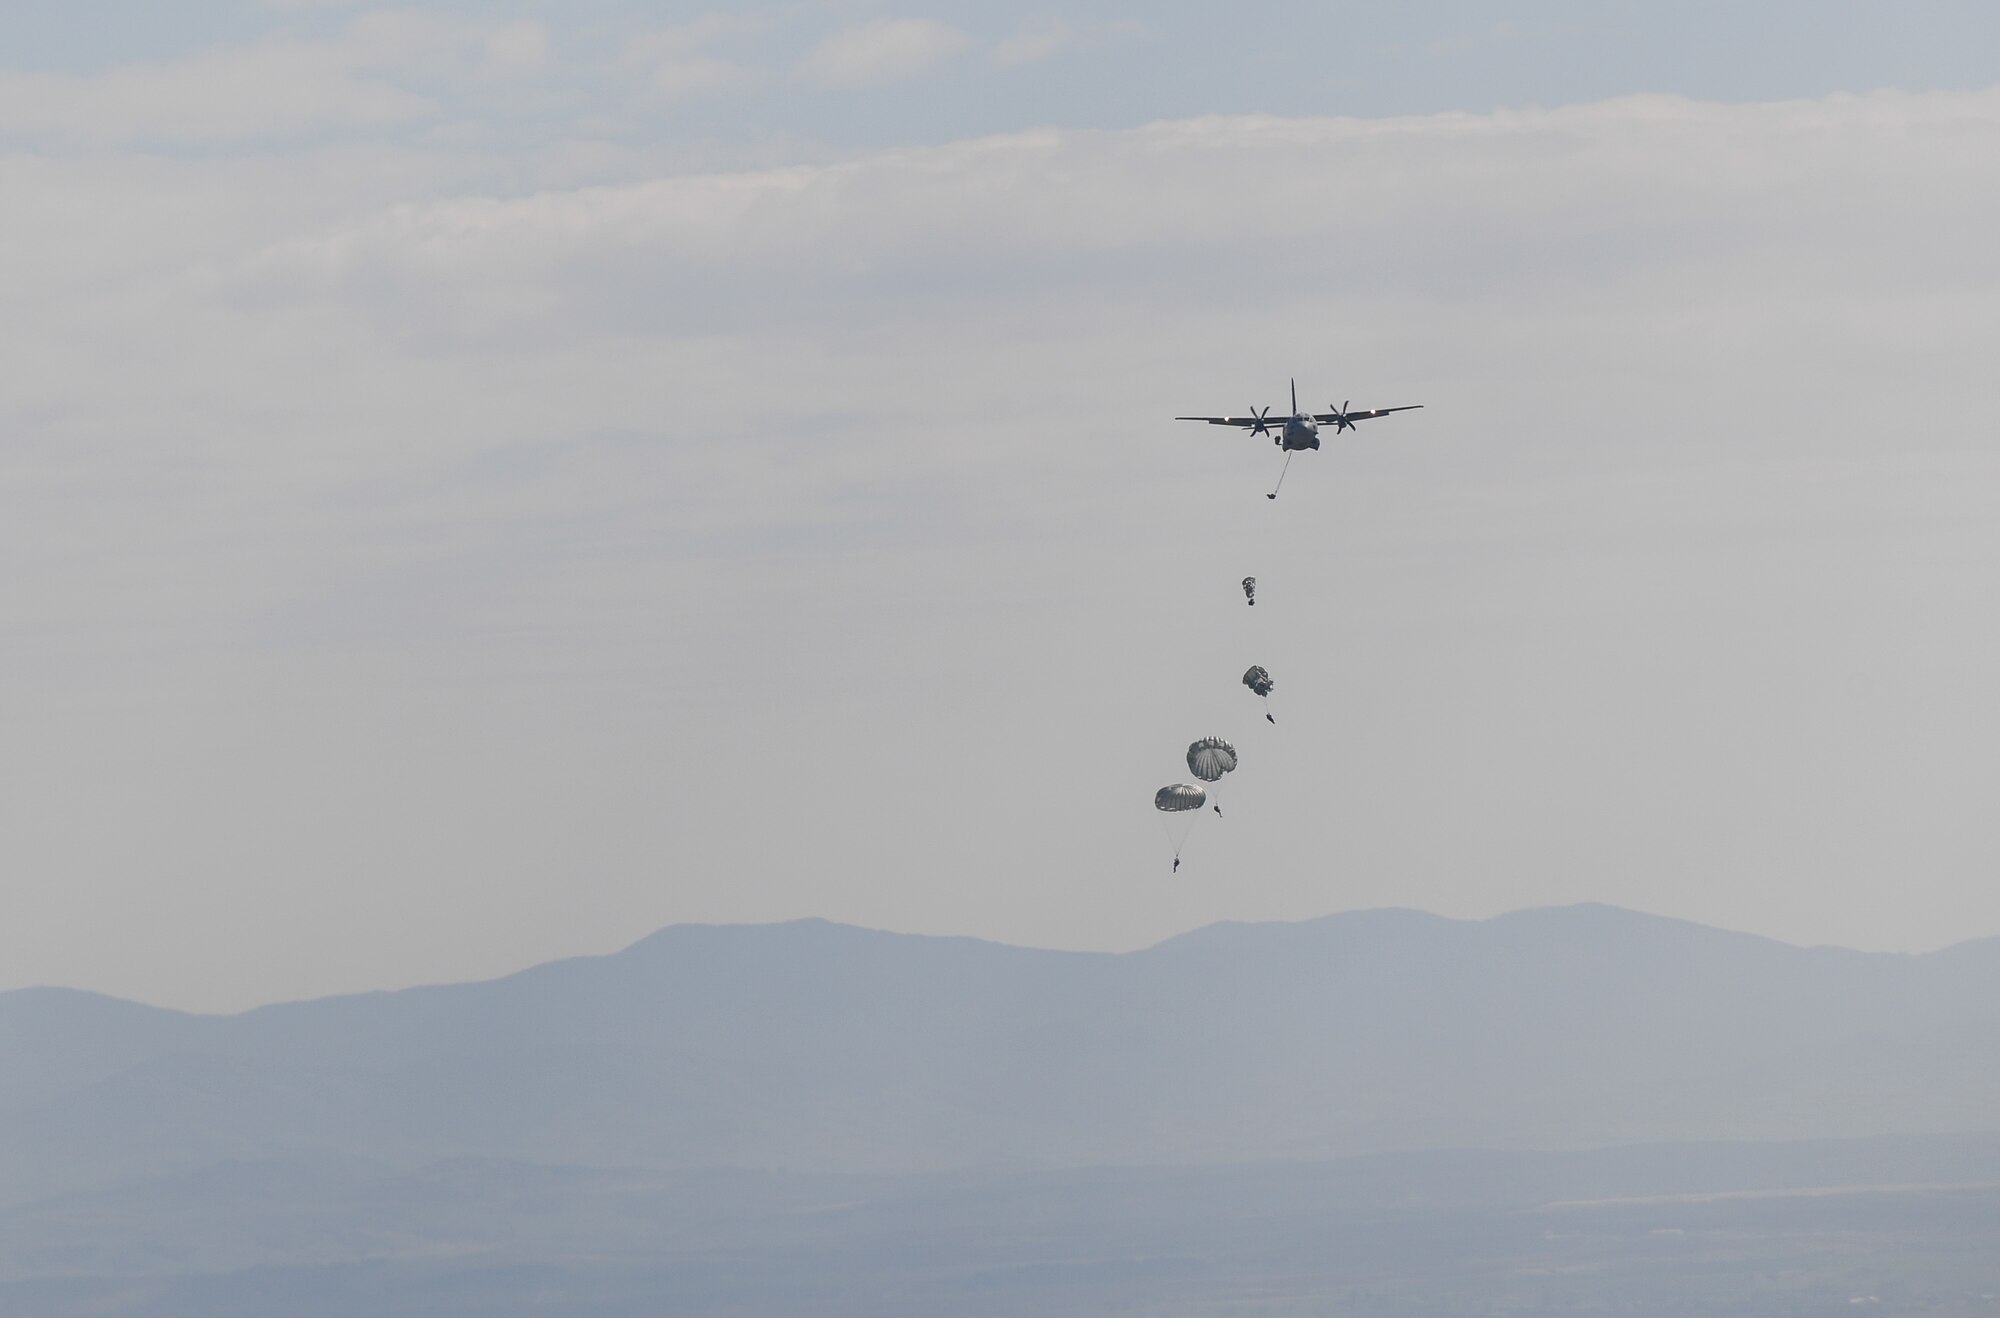 Bulgarian paratroopers descend from an Alenia C-27J Spartan during Exercise Thracian Spring 17 at Plovdiv Regional Airport, Bulgaria, March 20, 2017. Airmen from the 37th Airlift Squadron, 435th Contingency Response Group, and 86th Airlift Wing, Ramstein Air Base, Germany, partnered with the Bulgarian military for the two-week exercise. The U.S. shares a commitment with Bulgaria, a NATO ally, to promote peace and close cooperation on countering a range of regional and global threats. (U.S. Air Force photo by Staff Sgt. Nesha Humes)